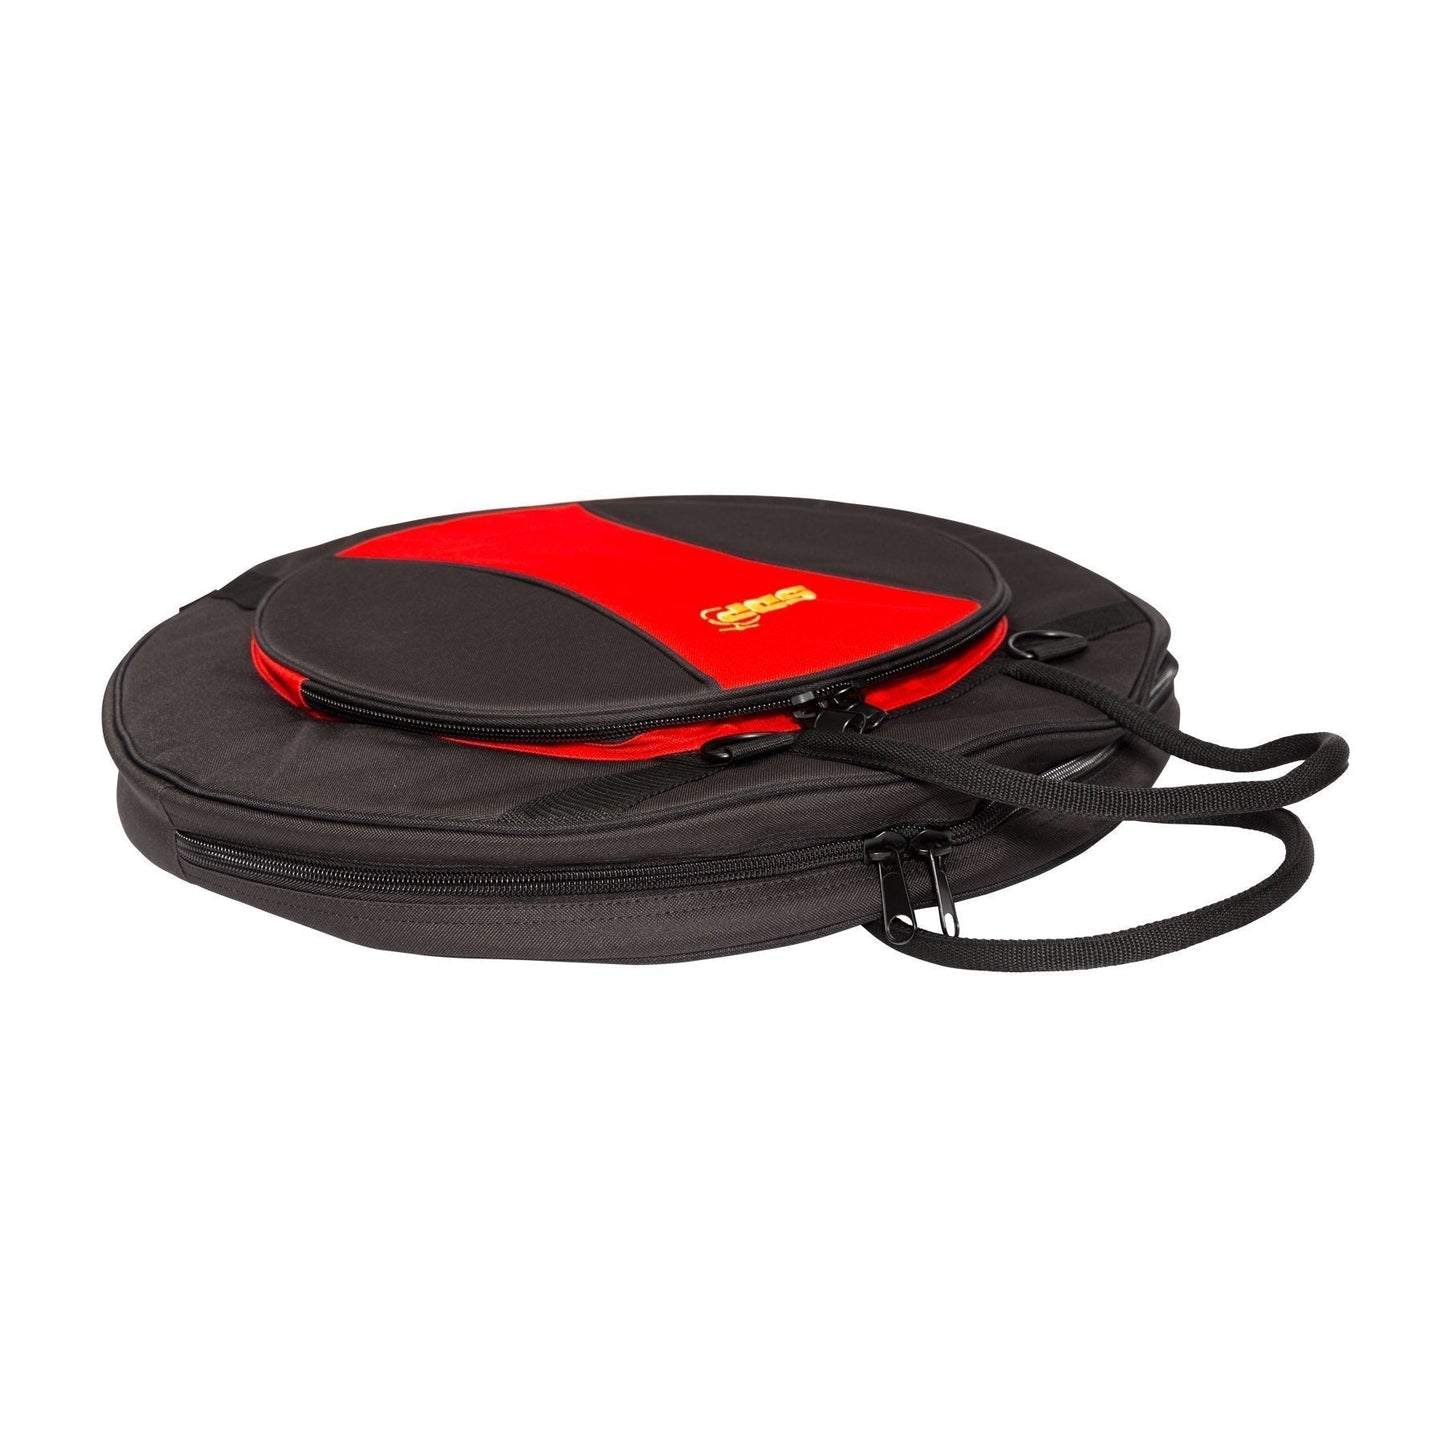 Load image into Gallery viewer, Sonic Drive Deluxe Cymbal Bag (Black with Red)
